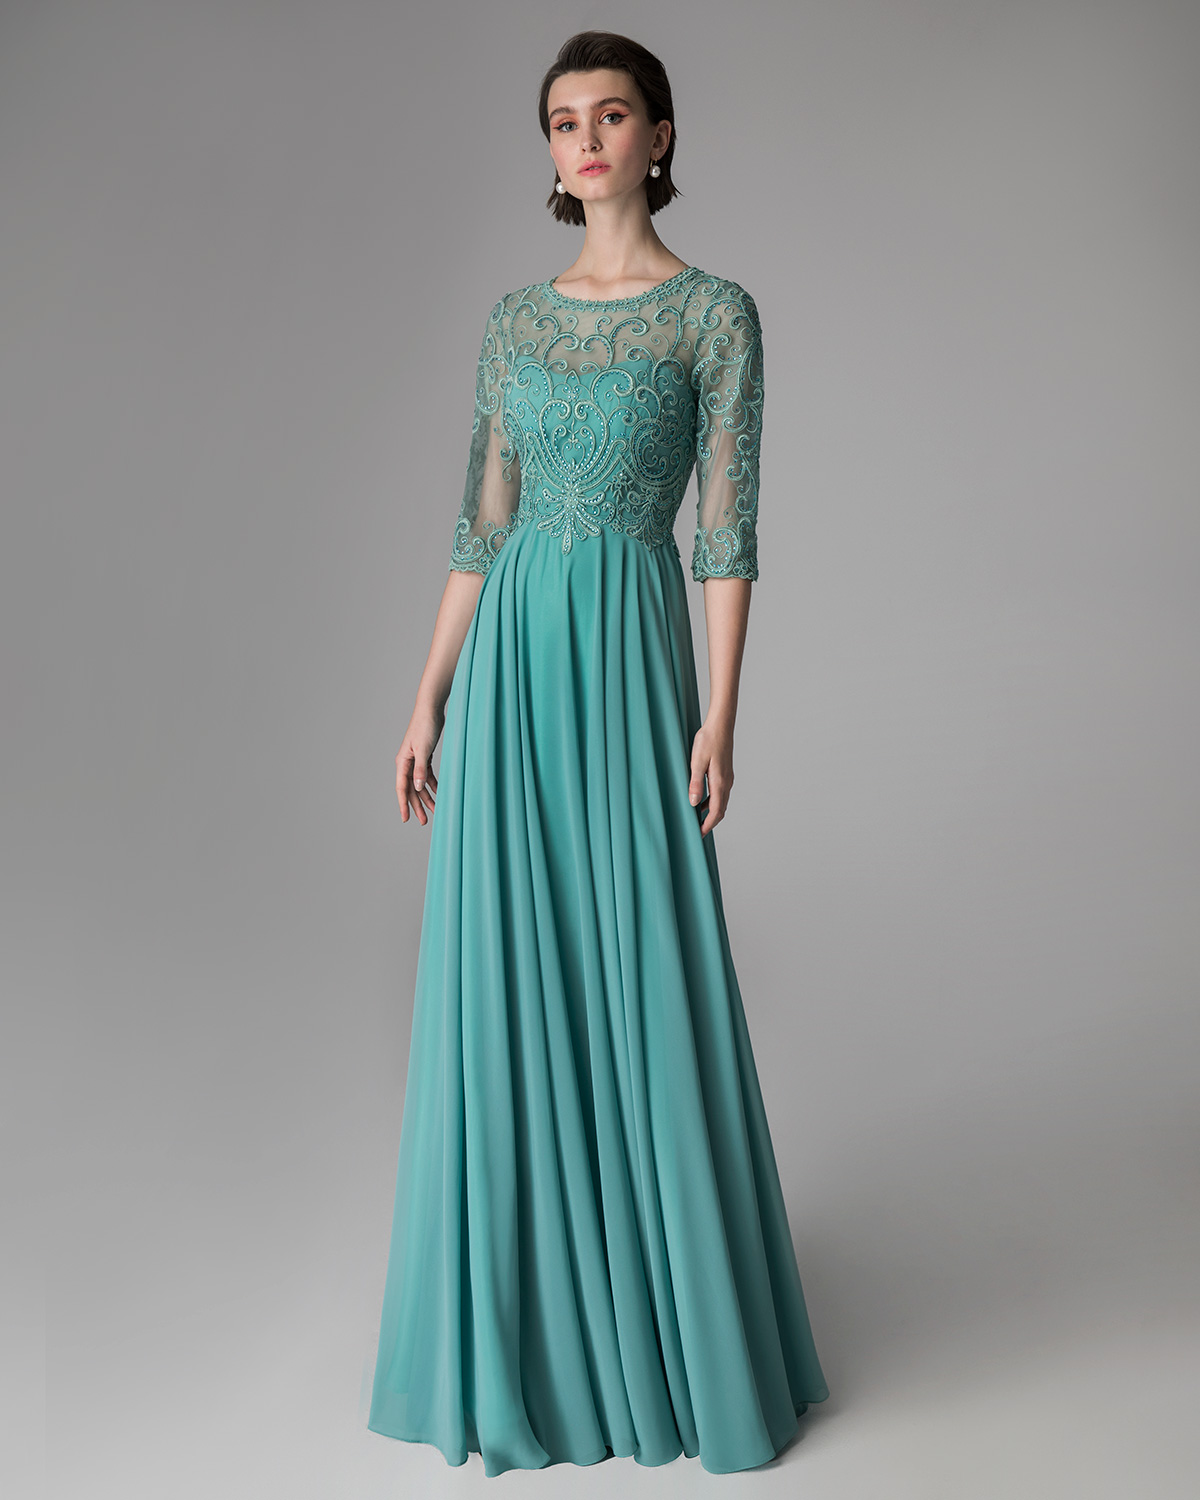 Классические платья / Long evening dress with applique lace on the top and long sleeves